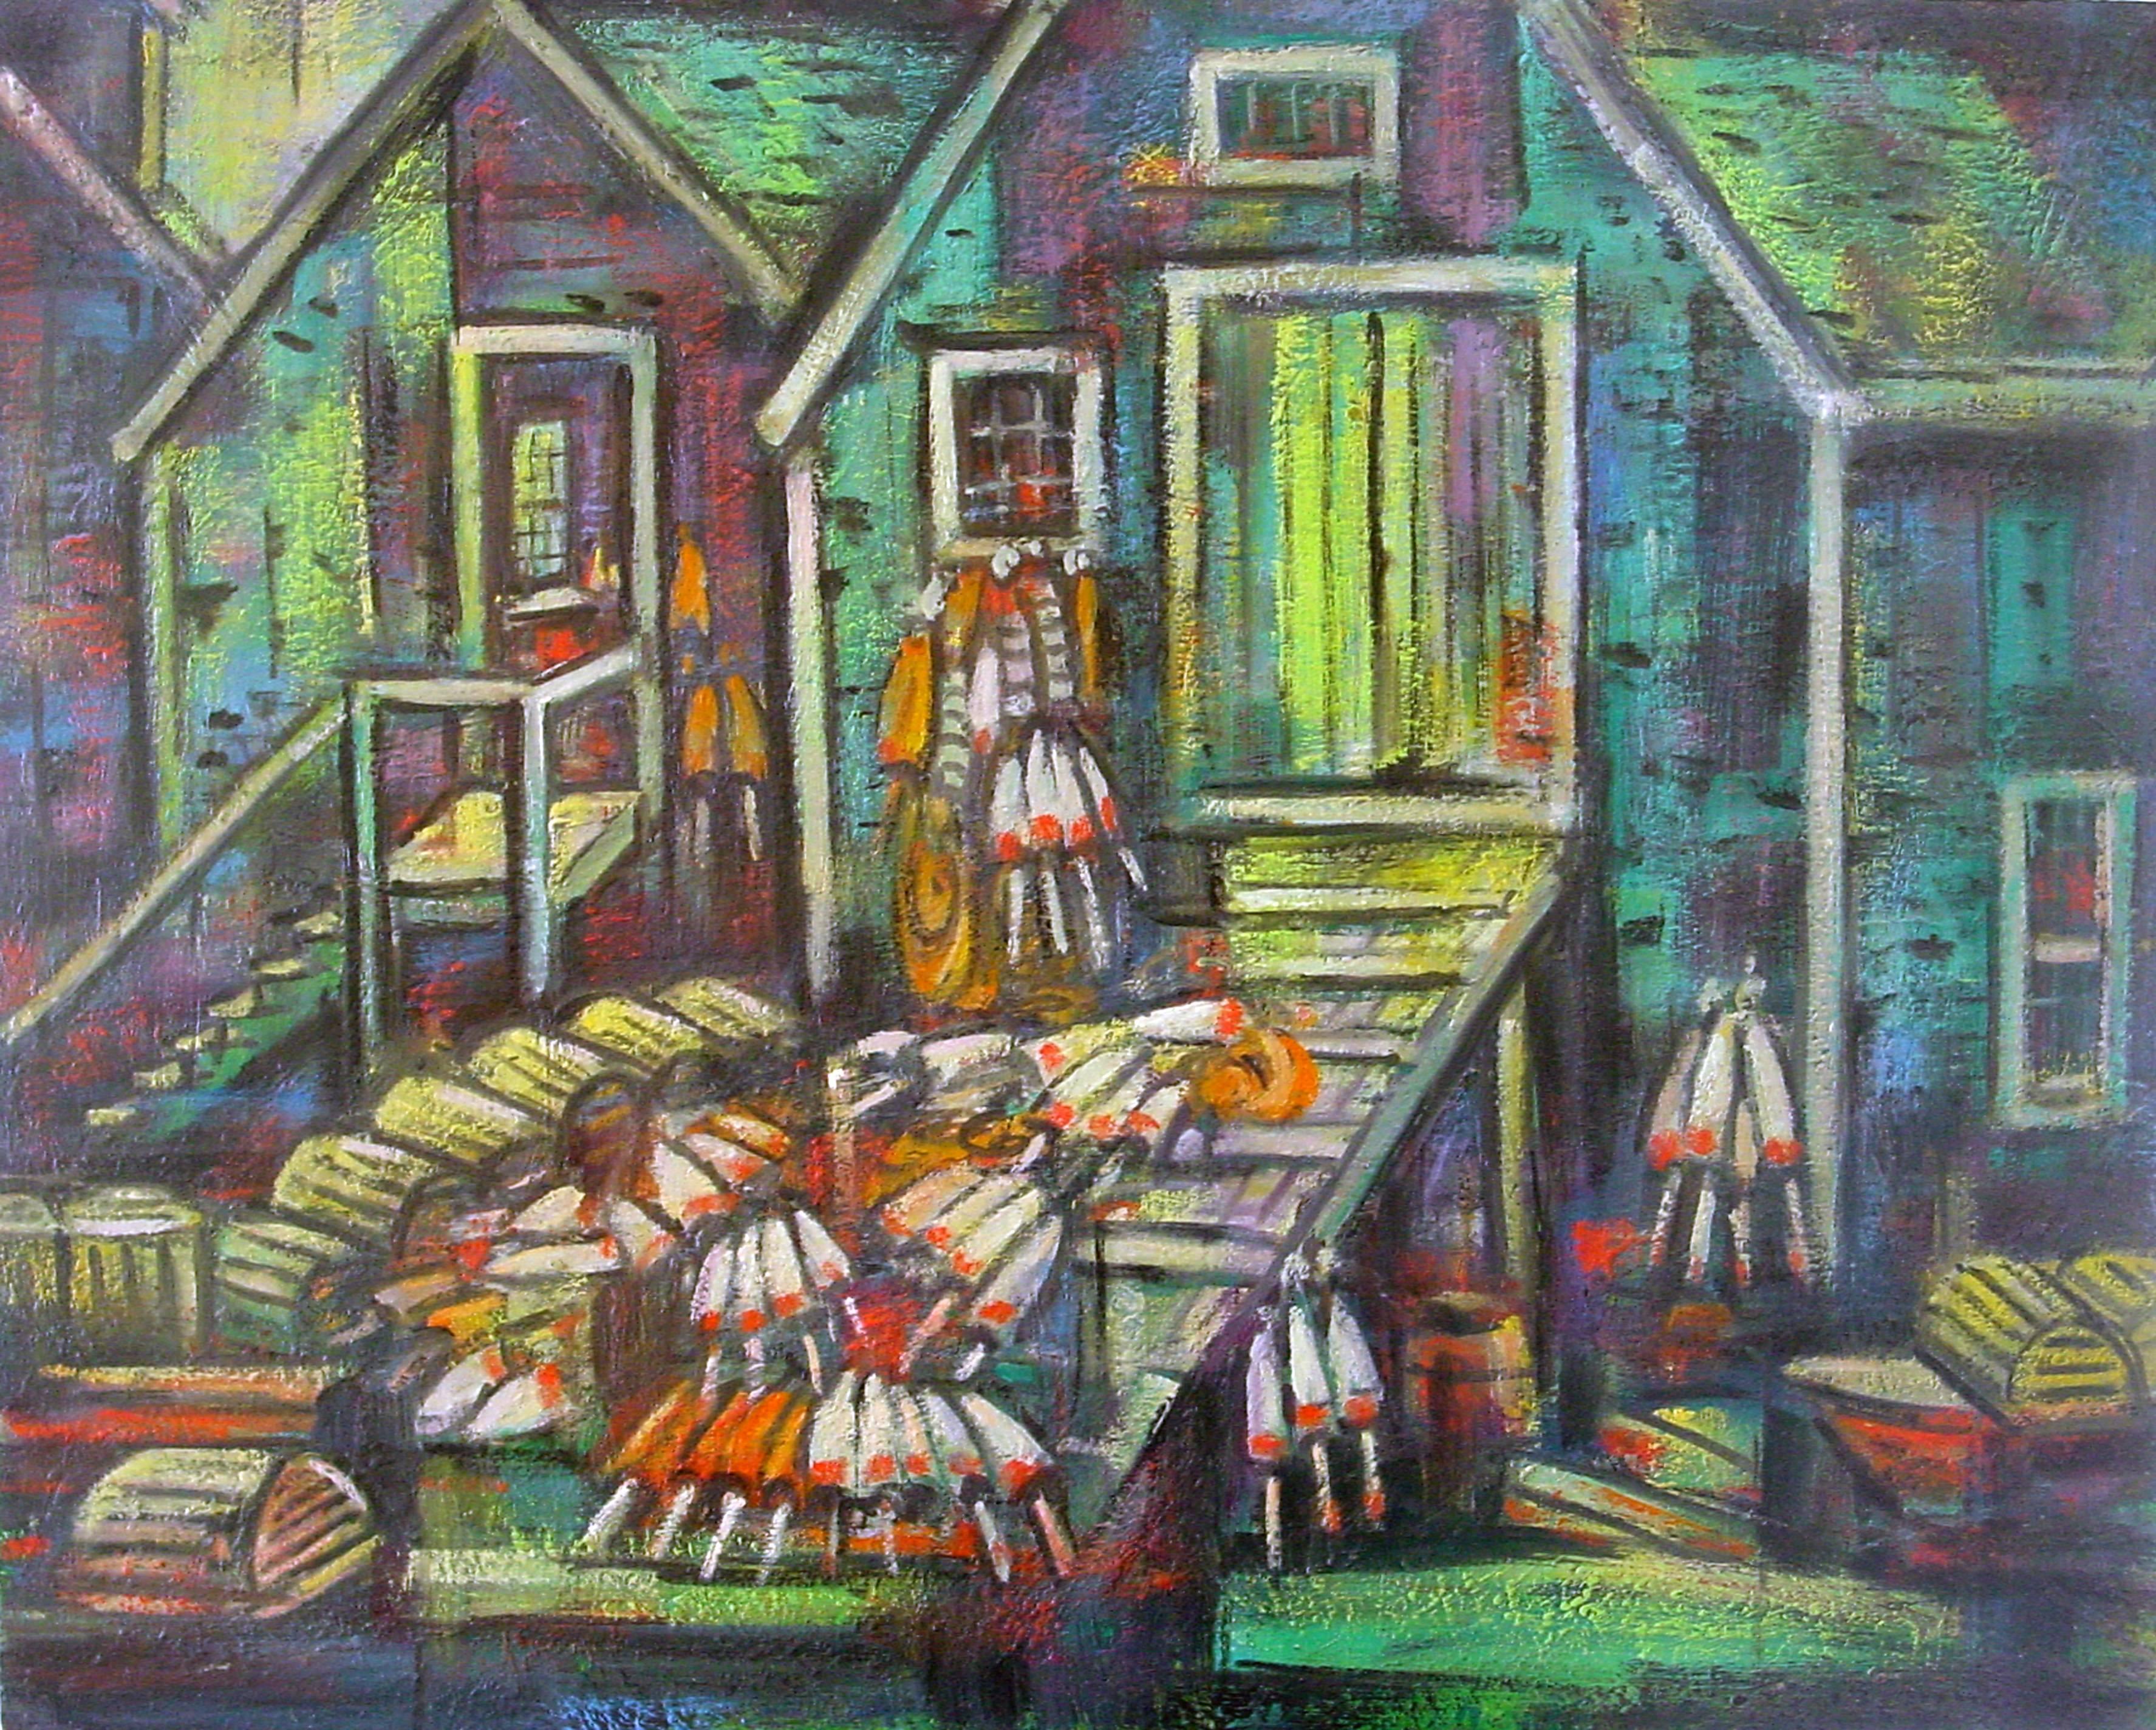 Monhegan Fish House - Painting by Emil Holzhauer